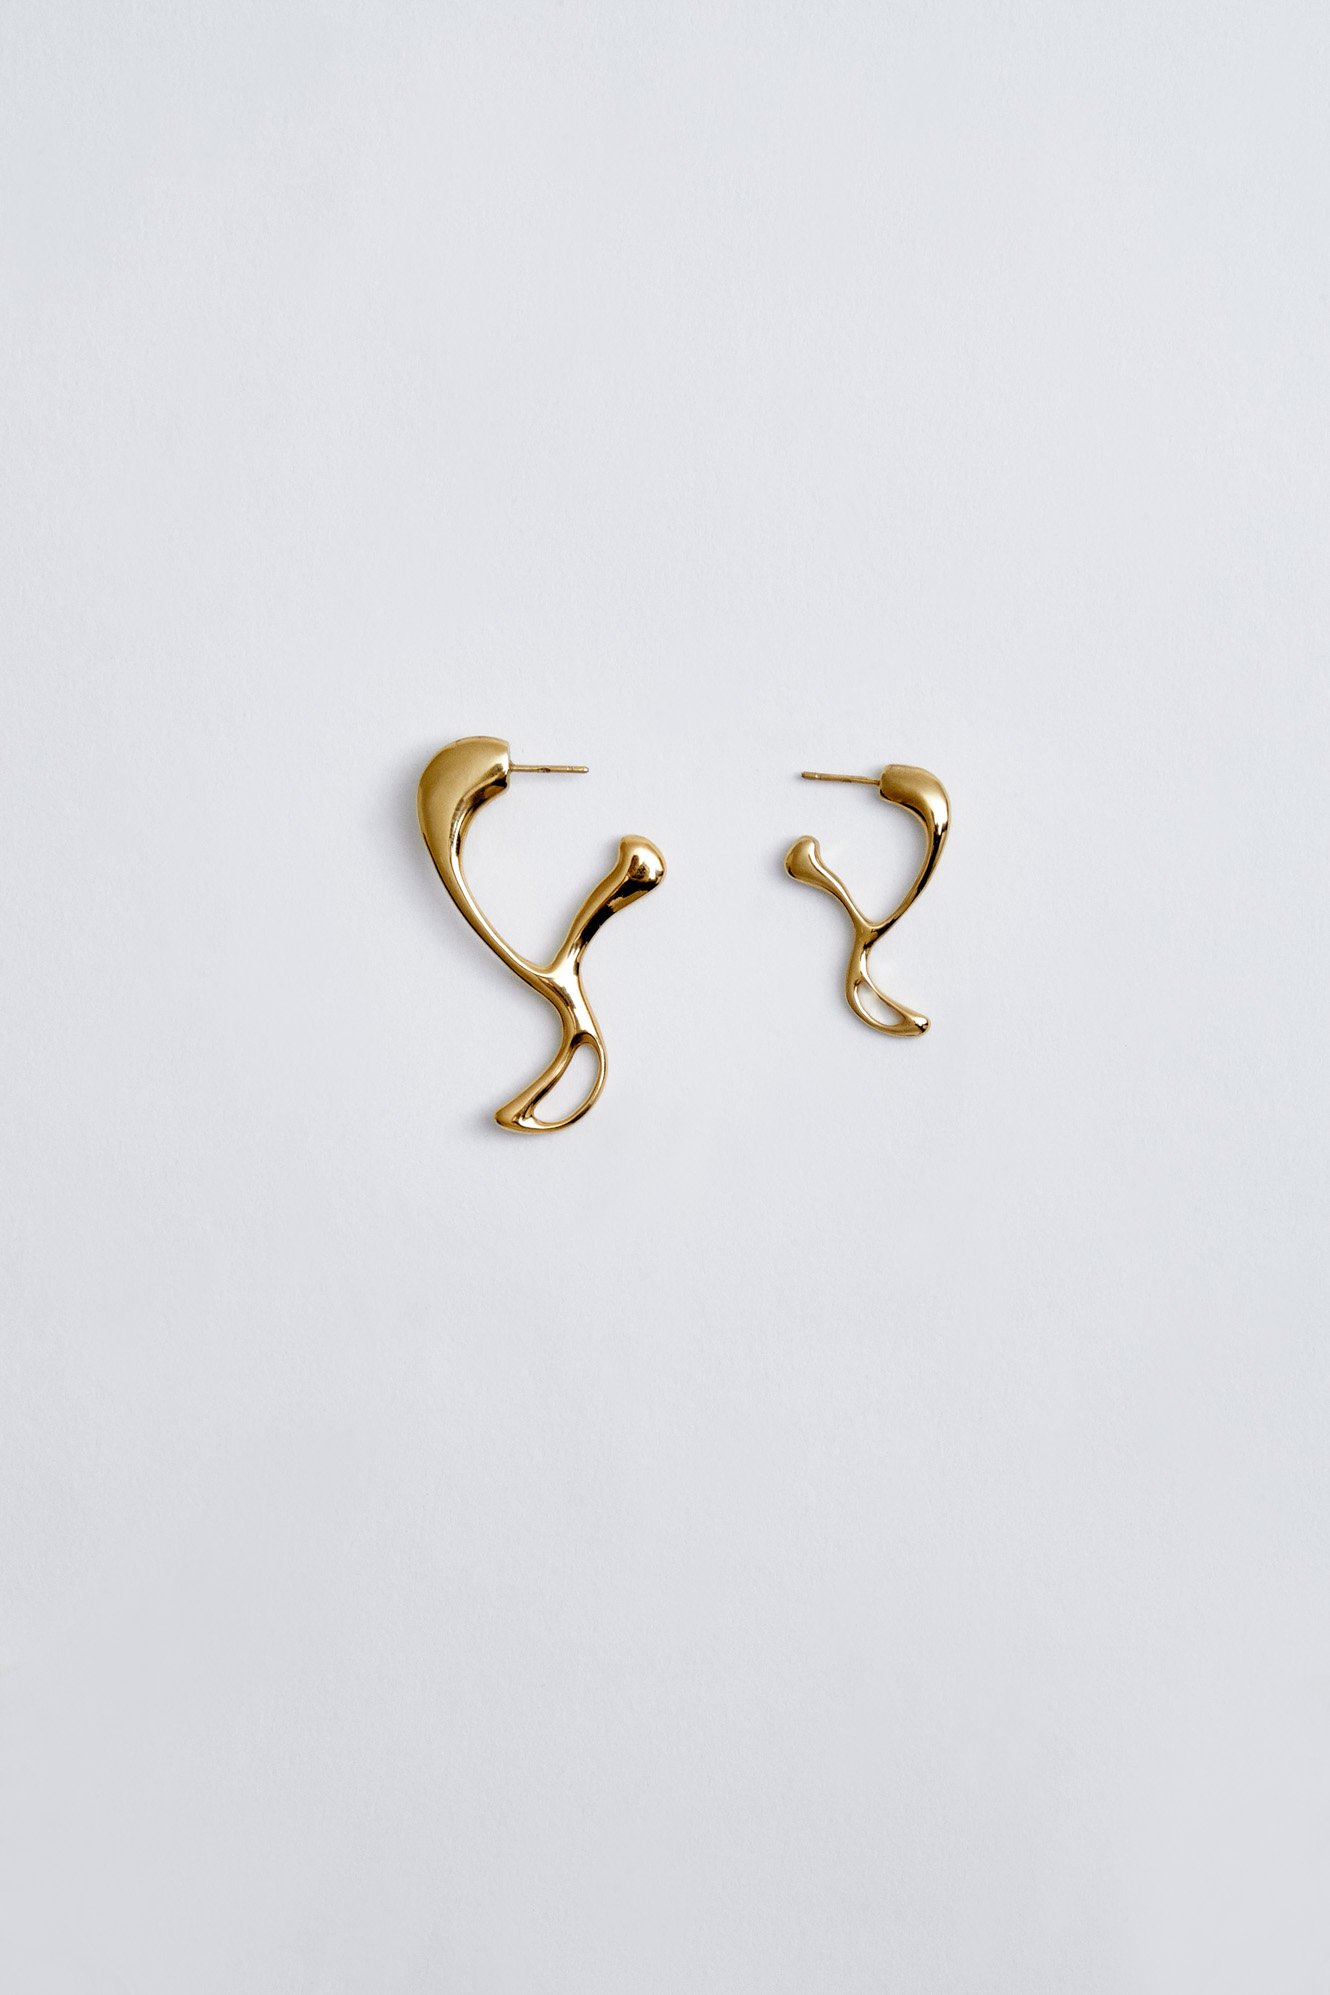 Handcrafted collection made-to-order - Julia Bartsch Jewellery Paris